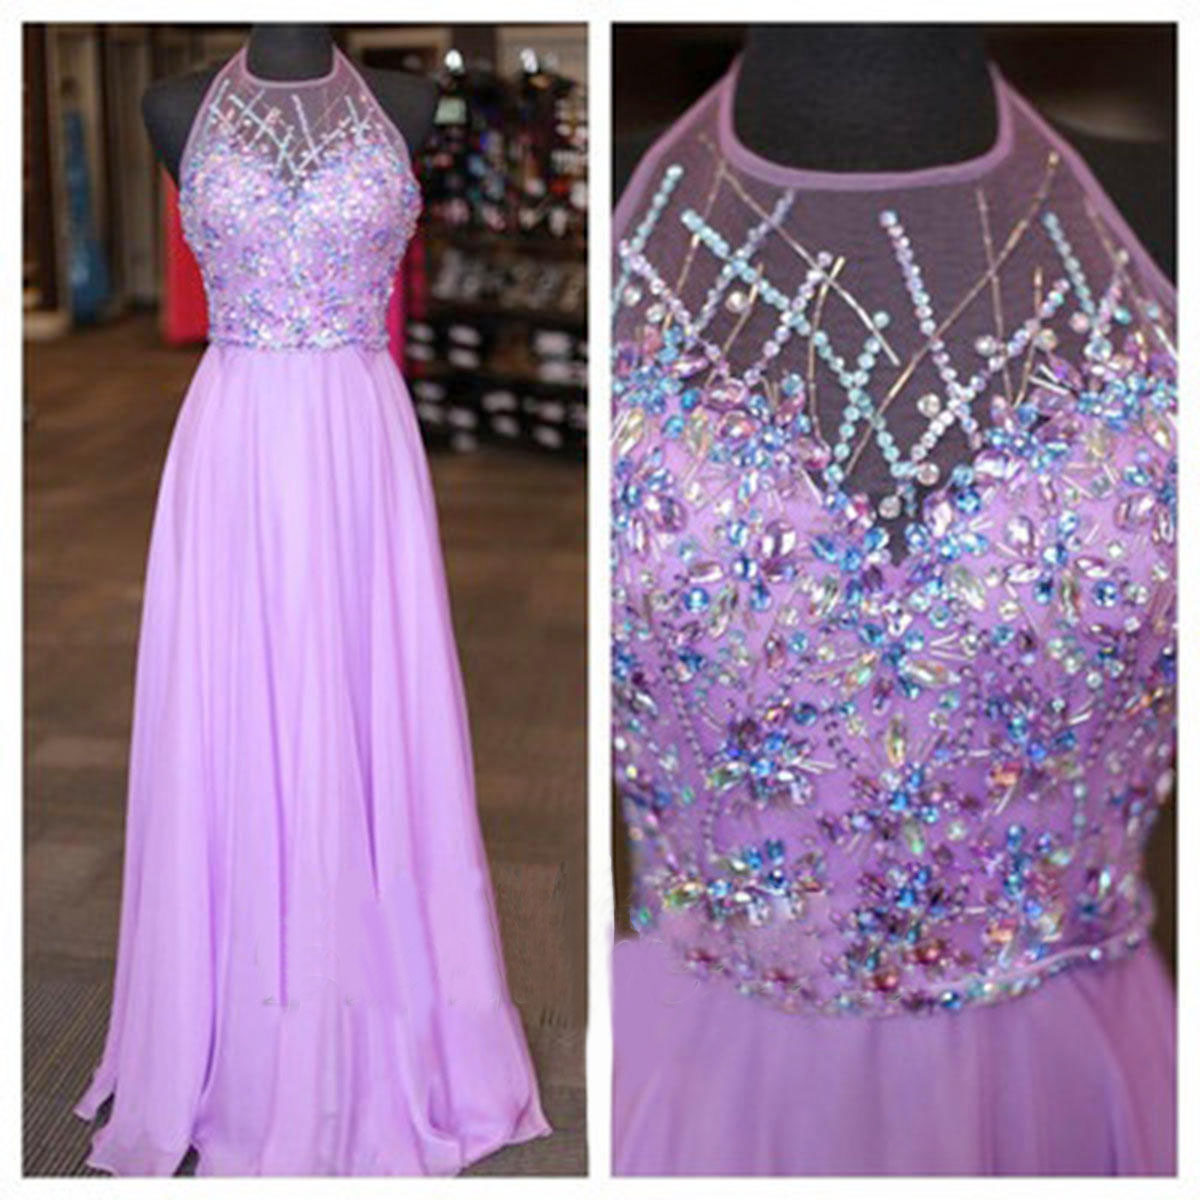 Lilac Prom Dresses, Beaded Prom Dress, Sexy Prom Dresses, Prom Dresses Prom Dresses, Sexy Prom Dresses, Dresses For Prom